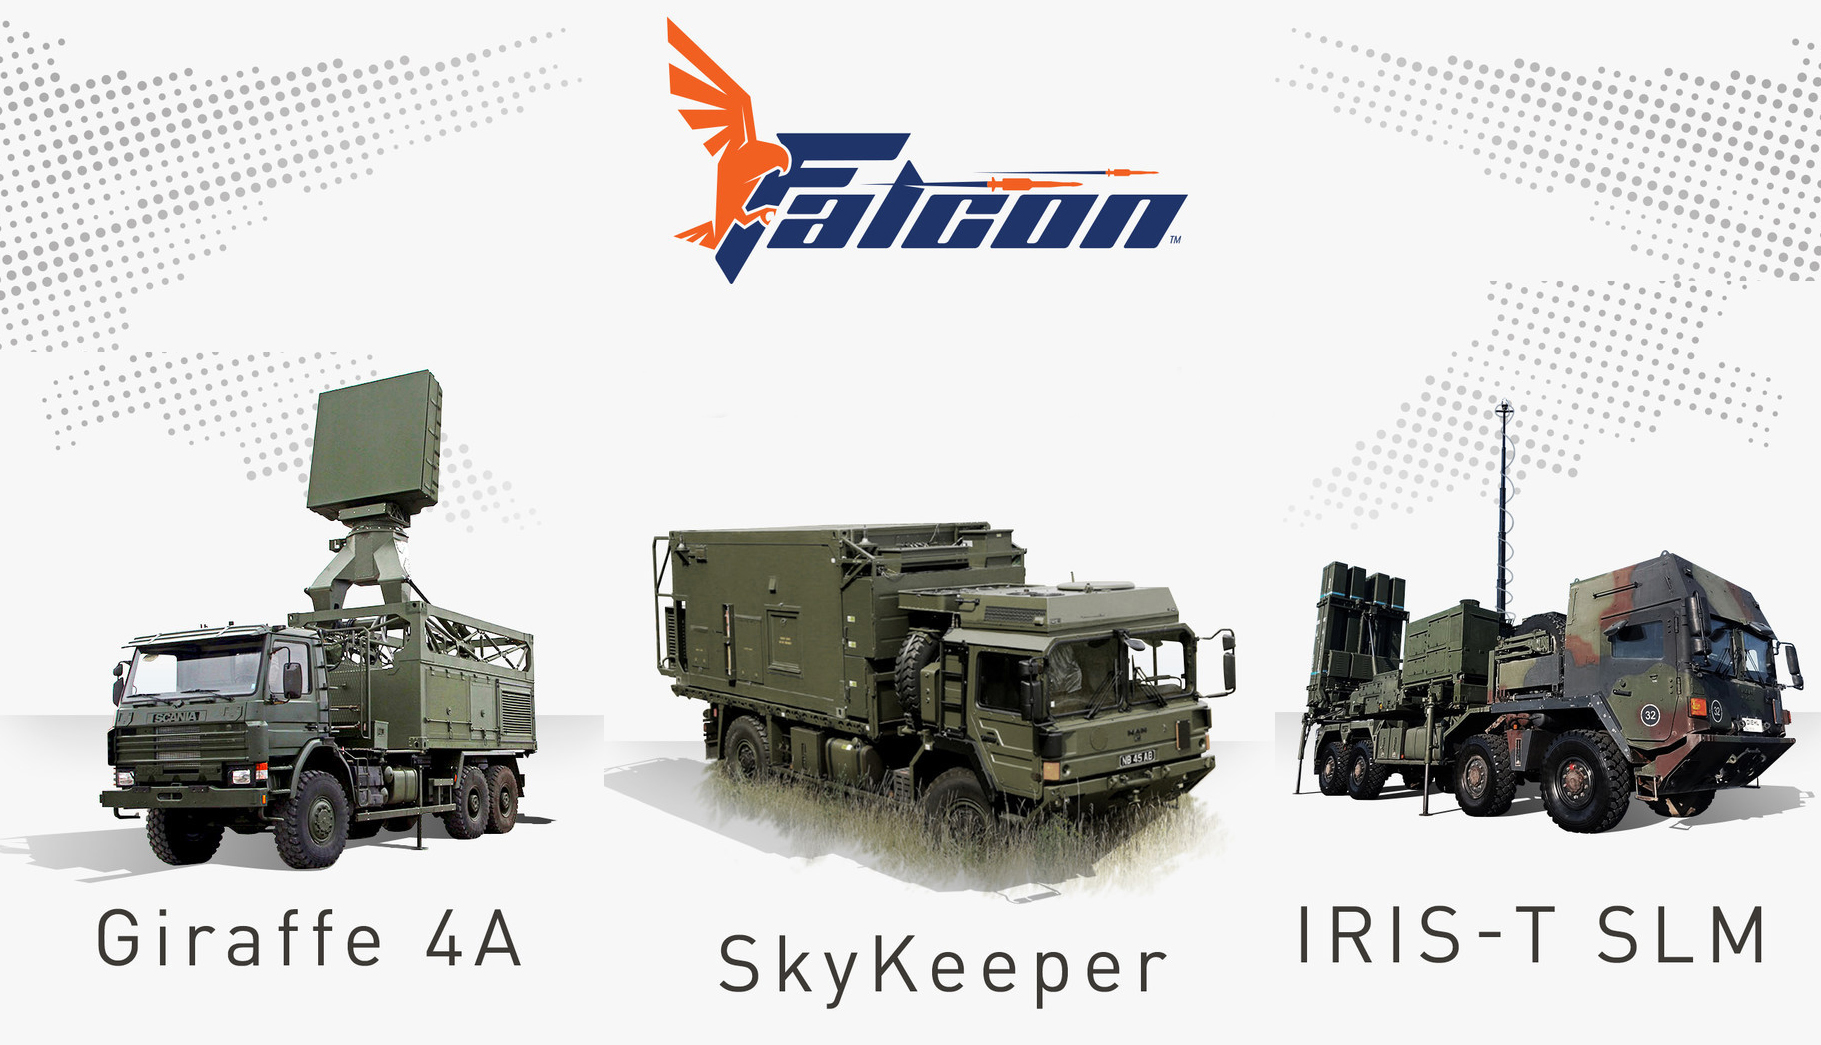 Infra-ready: the new Falcon air defense weapon system.